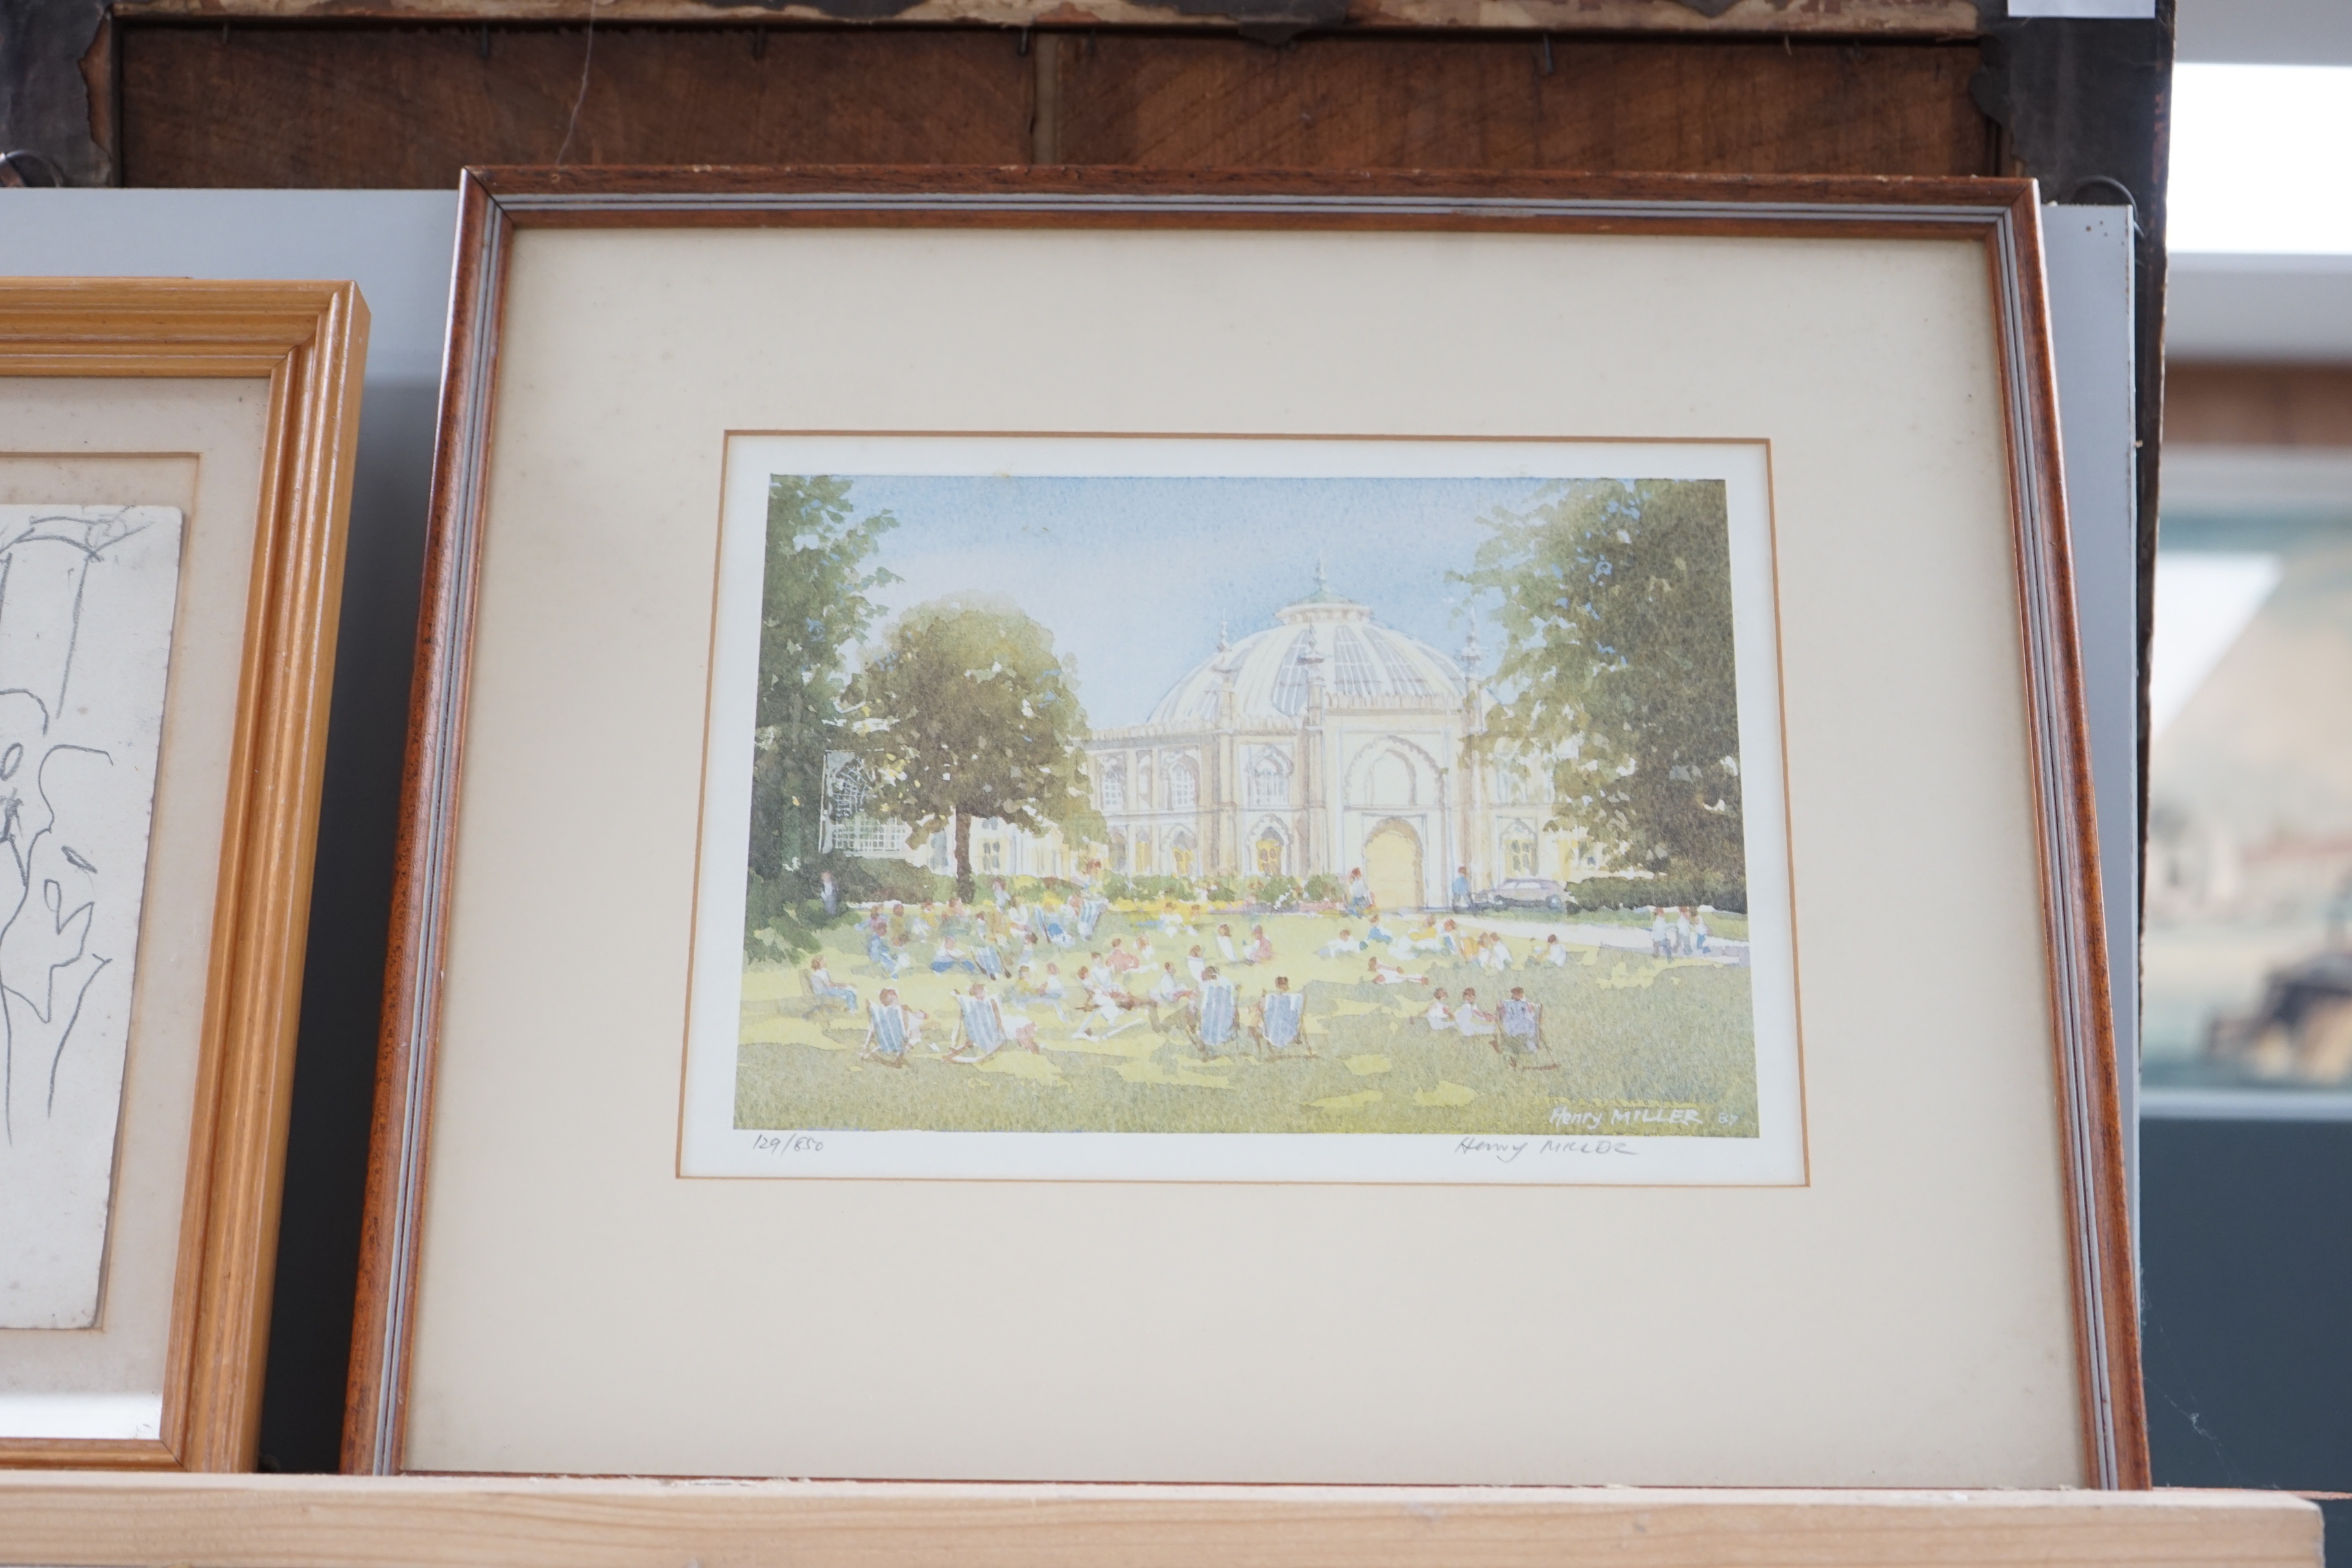 Henry Miller, colour print, The Dome, Brighton, signed in pencil, limited edition 129/850, details verso, 19.5 x 26.5cm